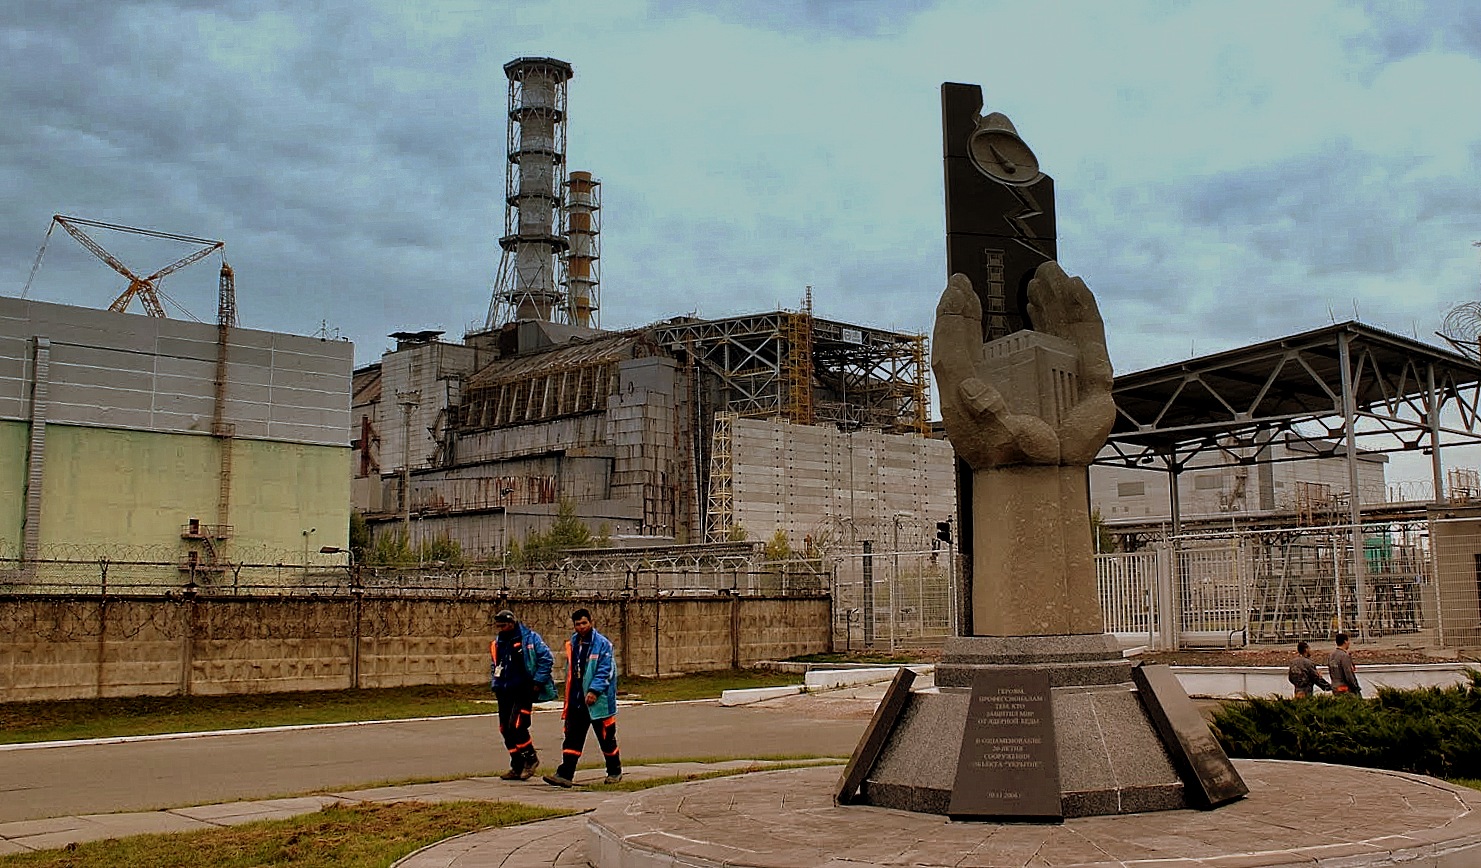 The #4 reactor building and its protective shelter in front is the memorial to the heroes that certainly protected Europe from nuclear disaster in 1986 at the Chernobyl plant Ukraine, Sept 2013